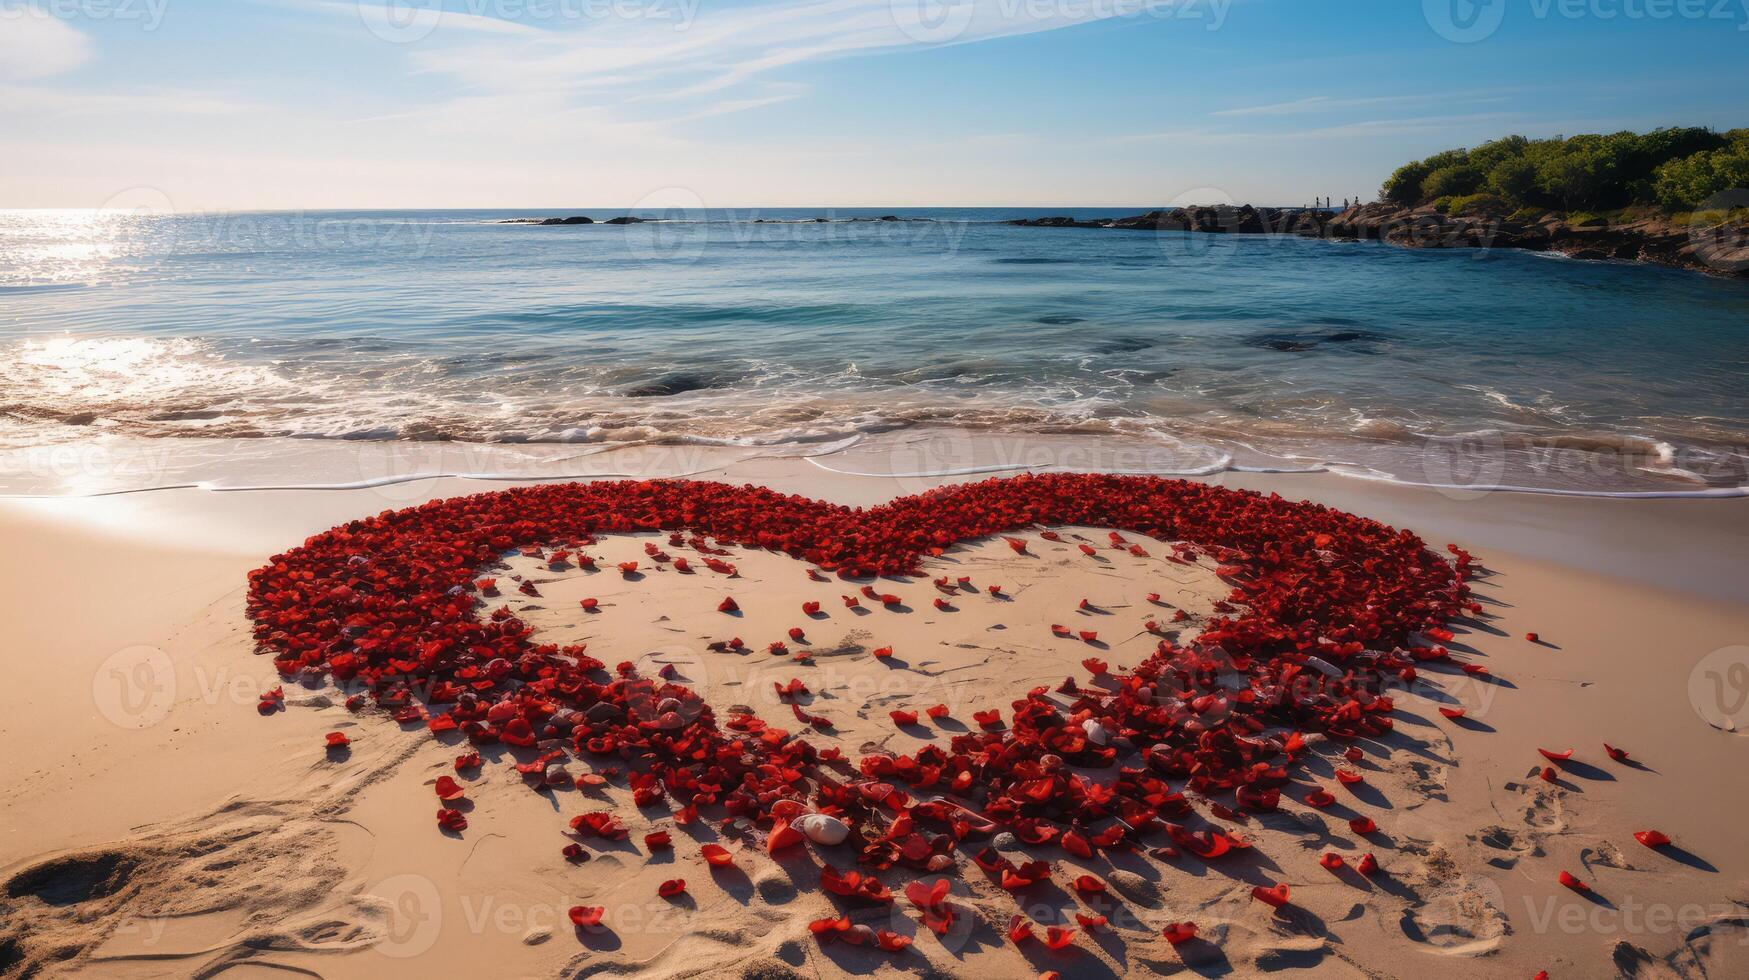 Heart shape made of red rose petals on a sandy beach by the ocean, creating a romantic and serene scene with waves gently crashing on the shore under a sunny blue sky. Ideal for love and wedding theme photo